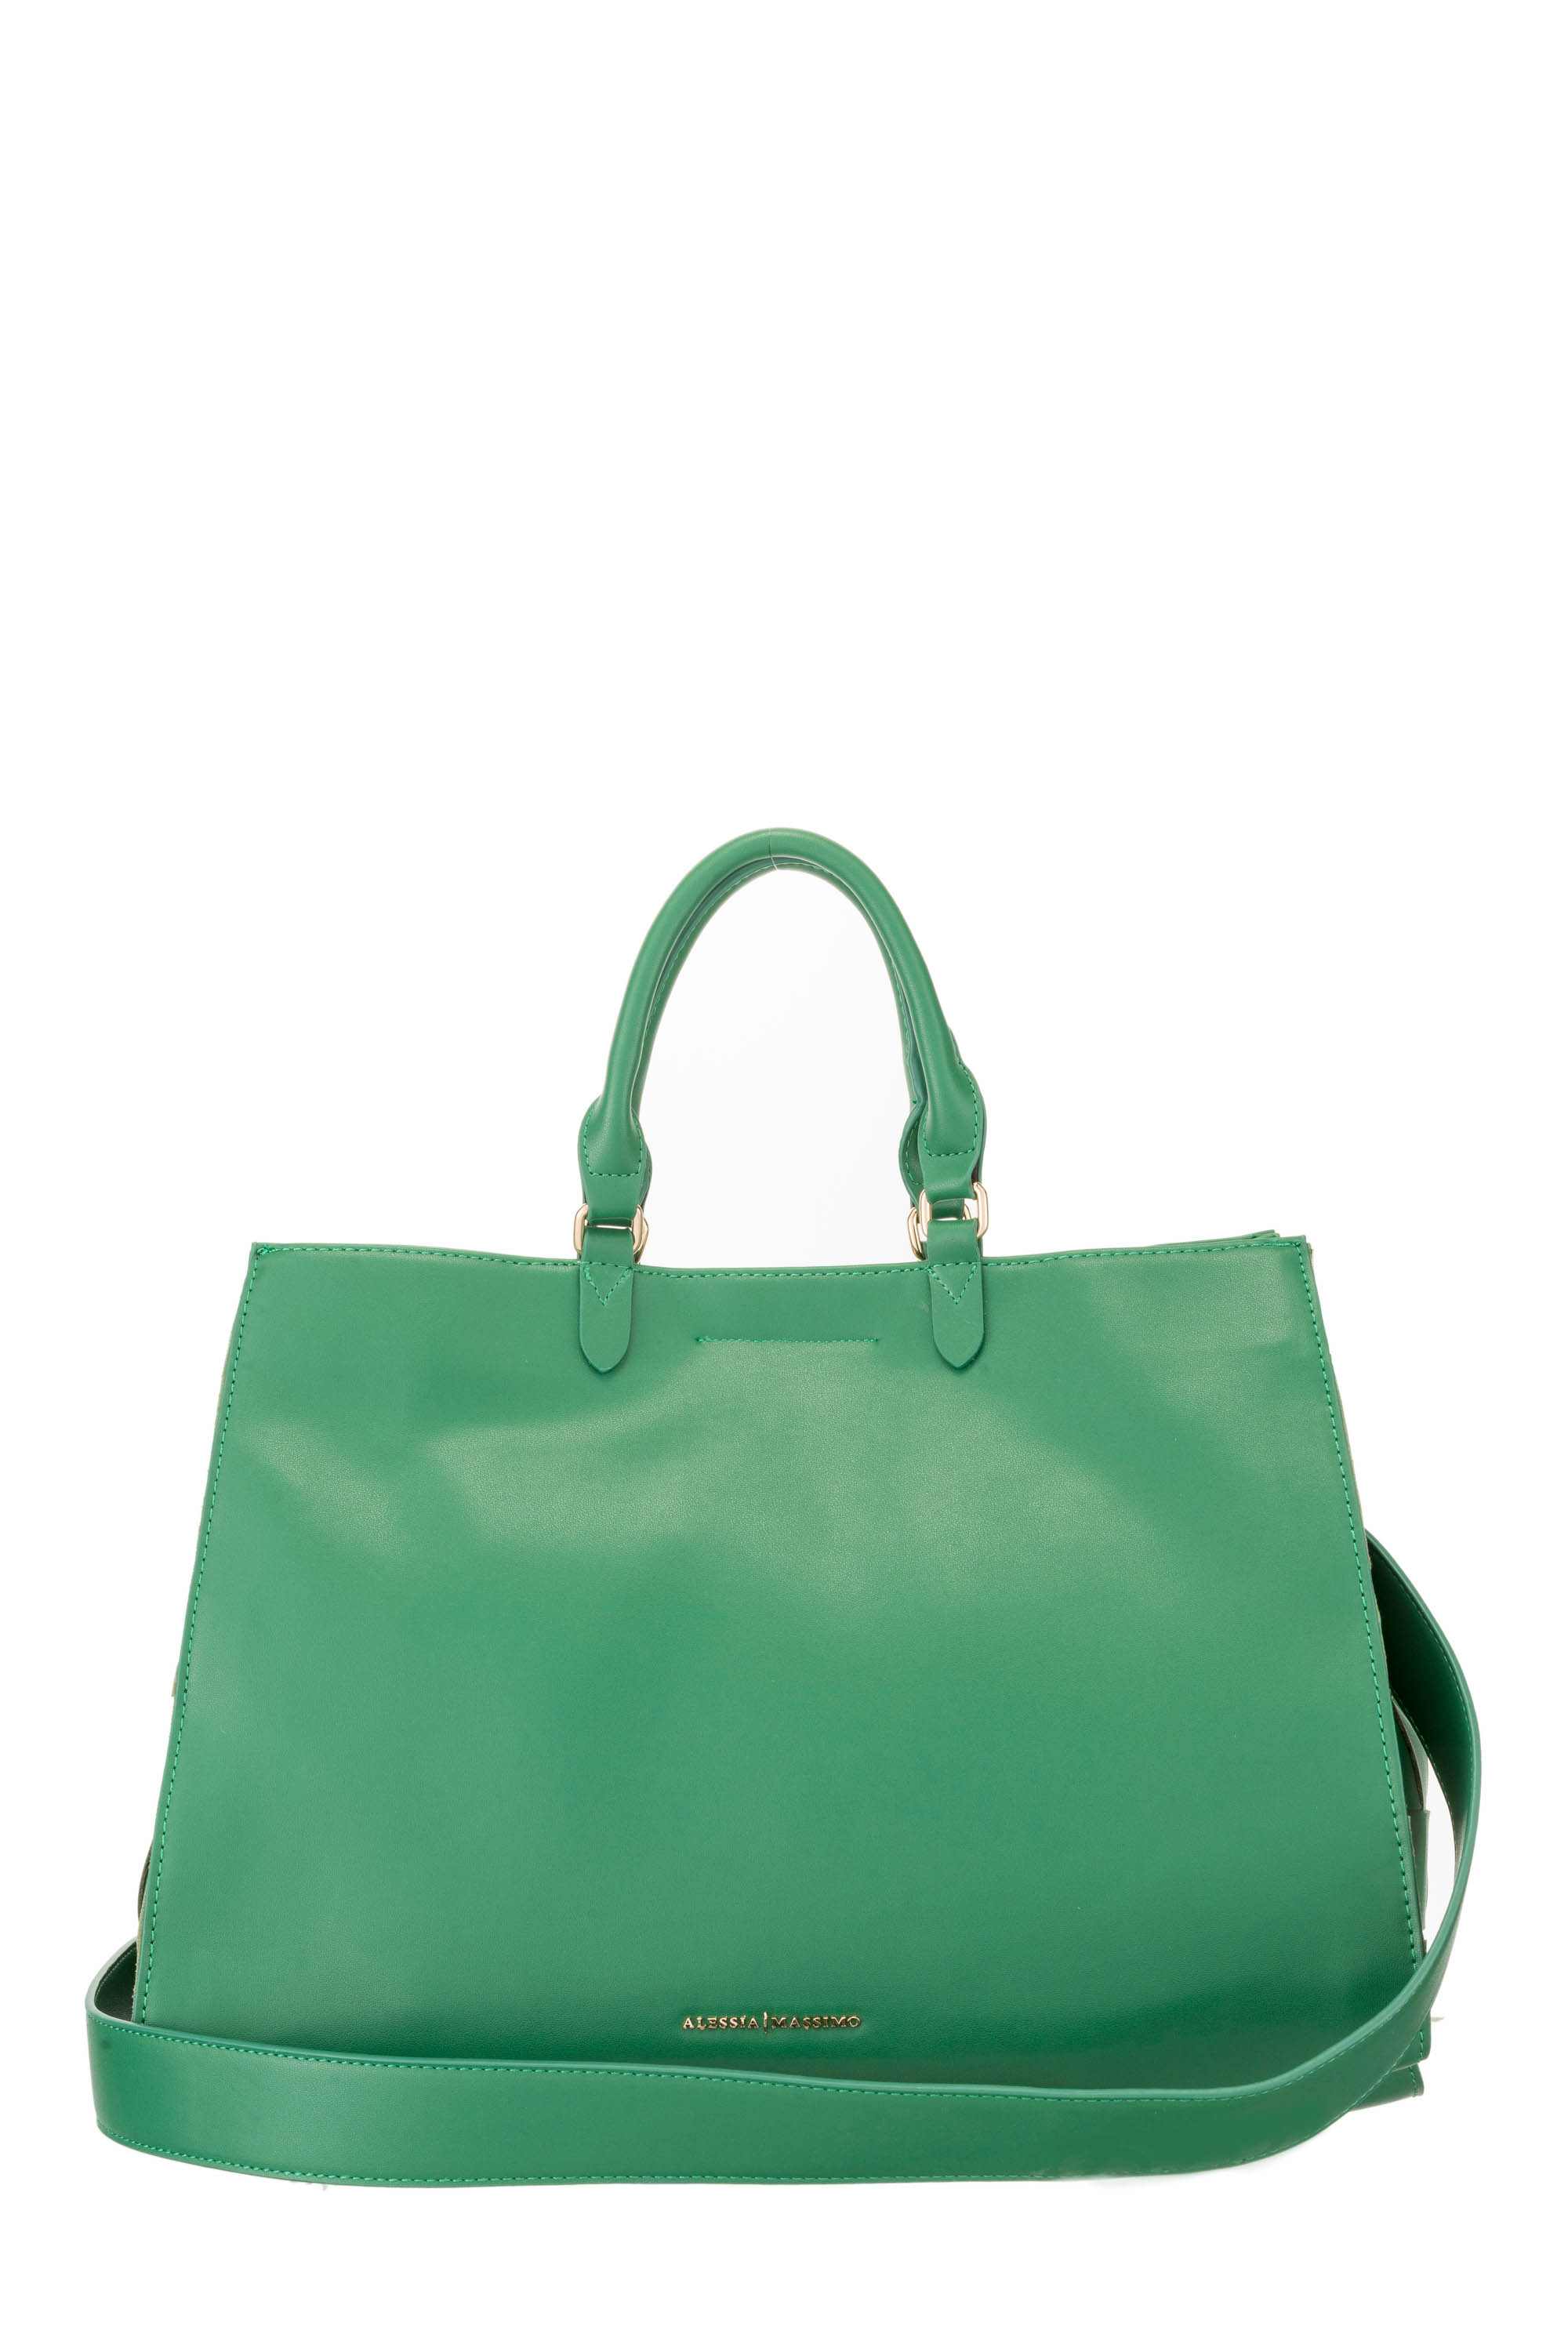 HAND BAG GREEN - STYLE1268